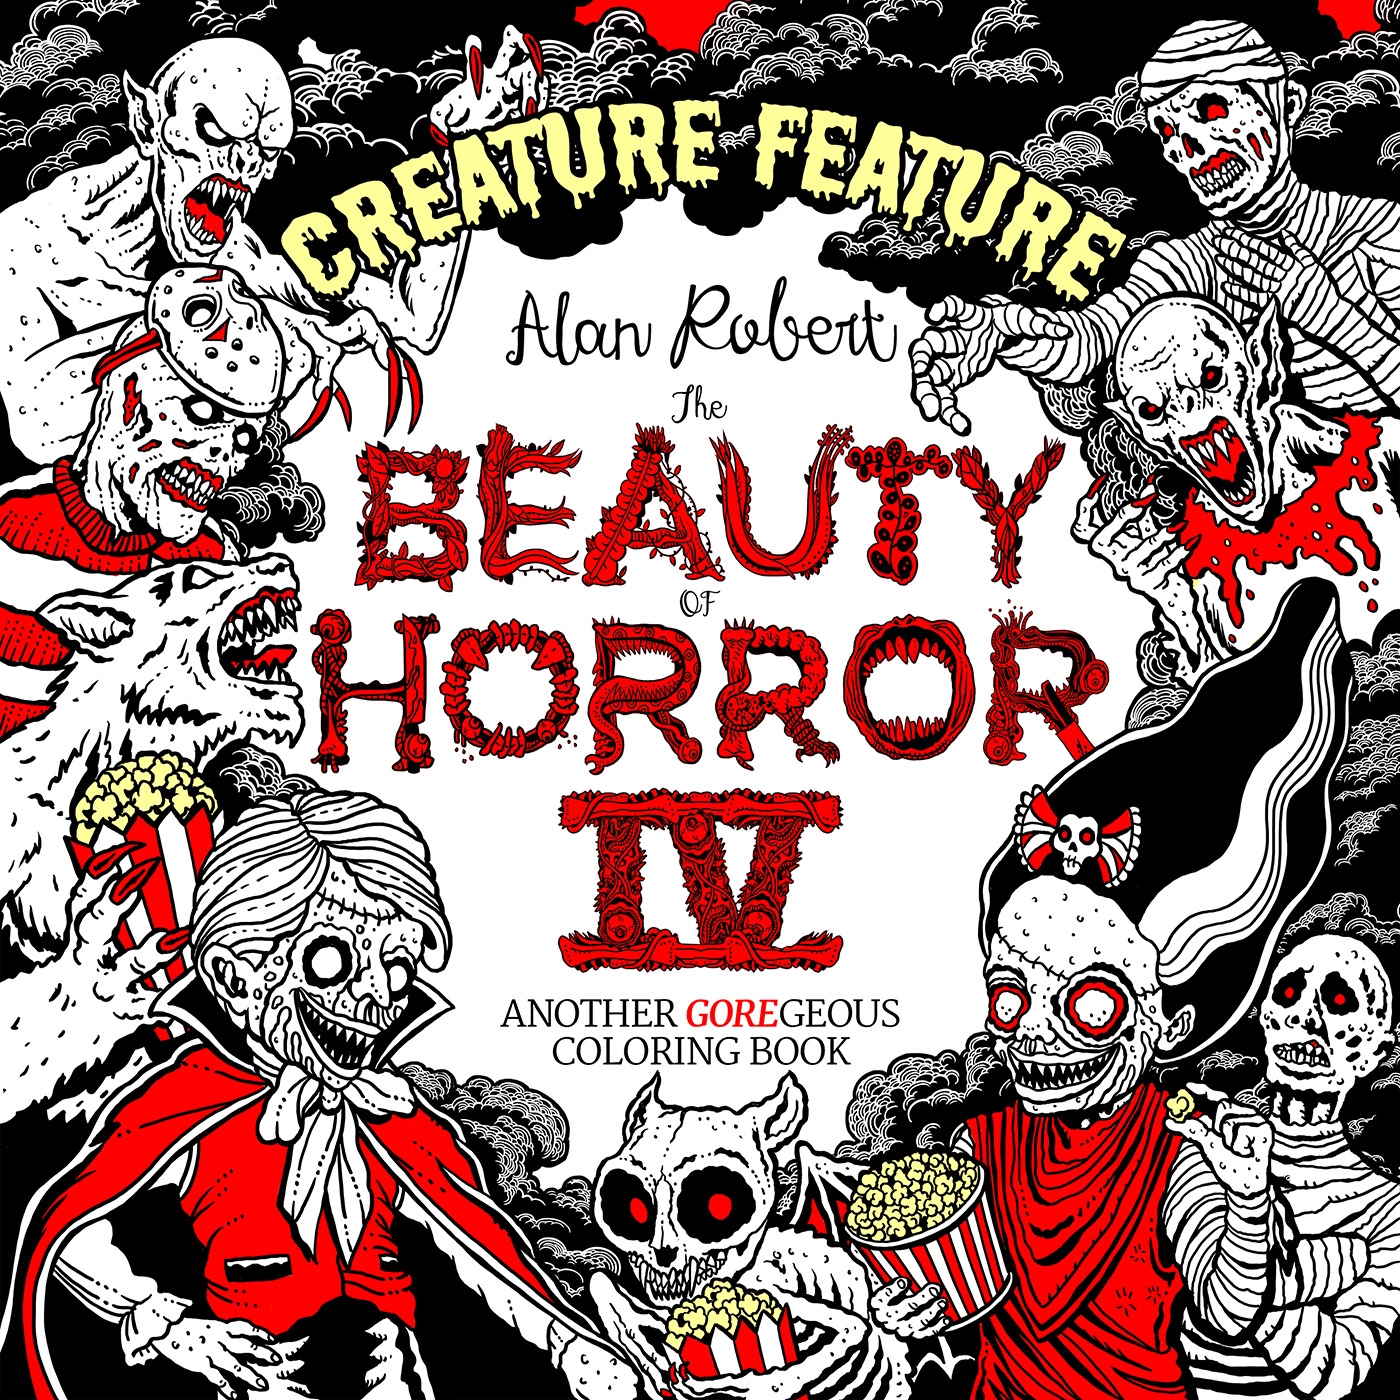 Download The Beauty Of Horror 4 Creature Feature Coloring Book By Alan Robert Penguin Books Australia